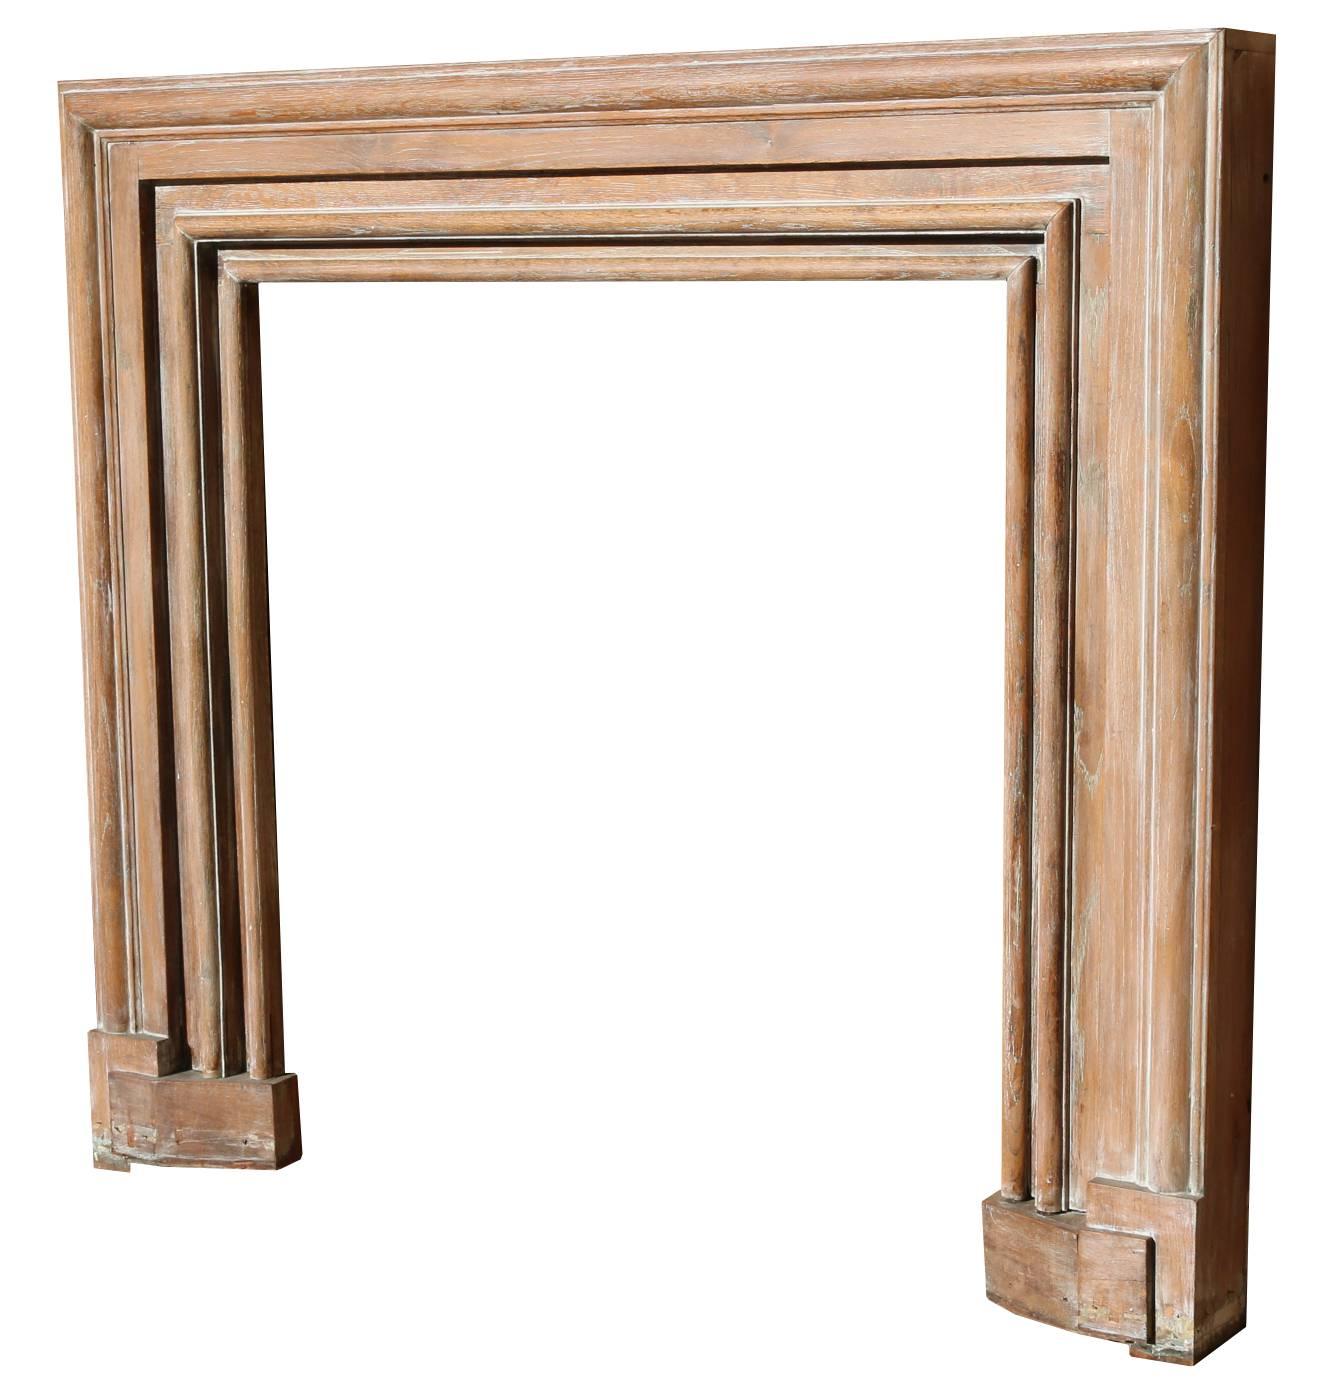 This fire surround is in good condition with only some wear to the foot blocks.
Opening height 110 cm
Opening width 99 cm
Weight 35 kg.